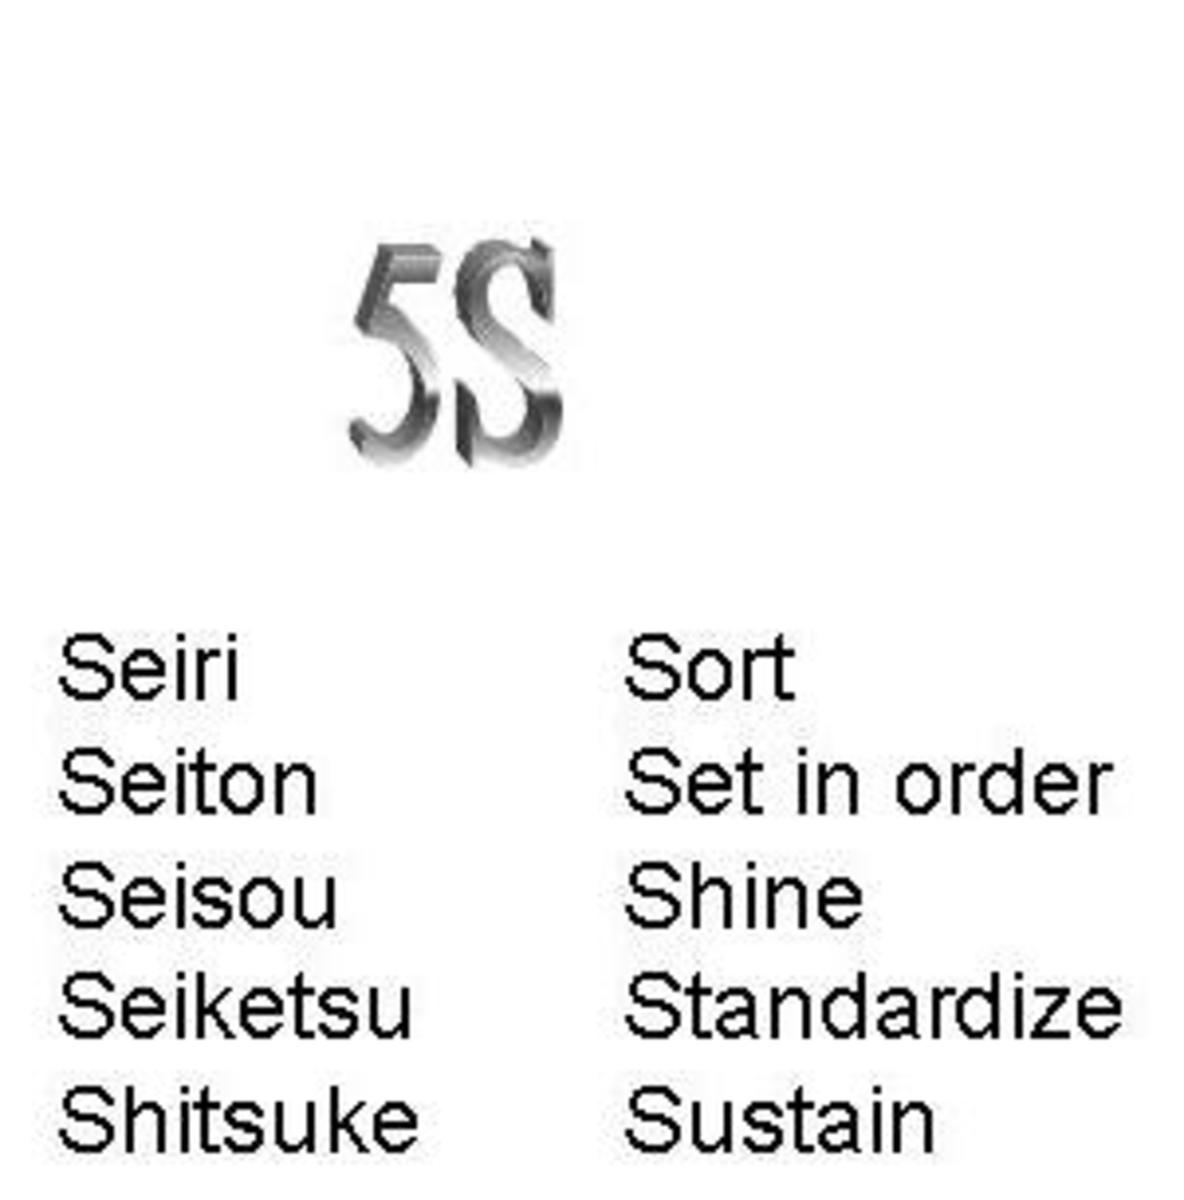 5S originally stood for 5 Japanese terms starting with S and have been translated into English as sort, set in order, shine, standardize and sustain.